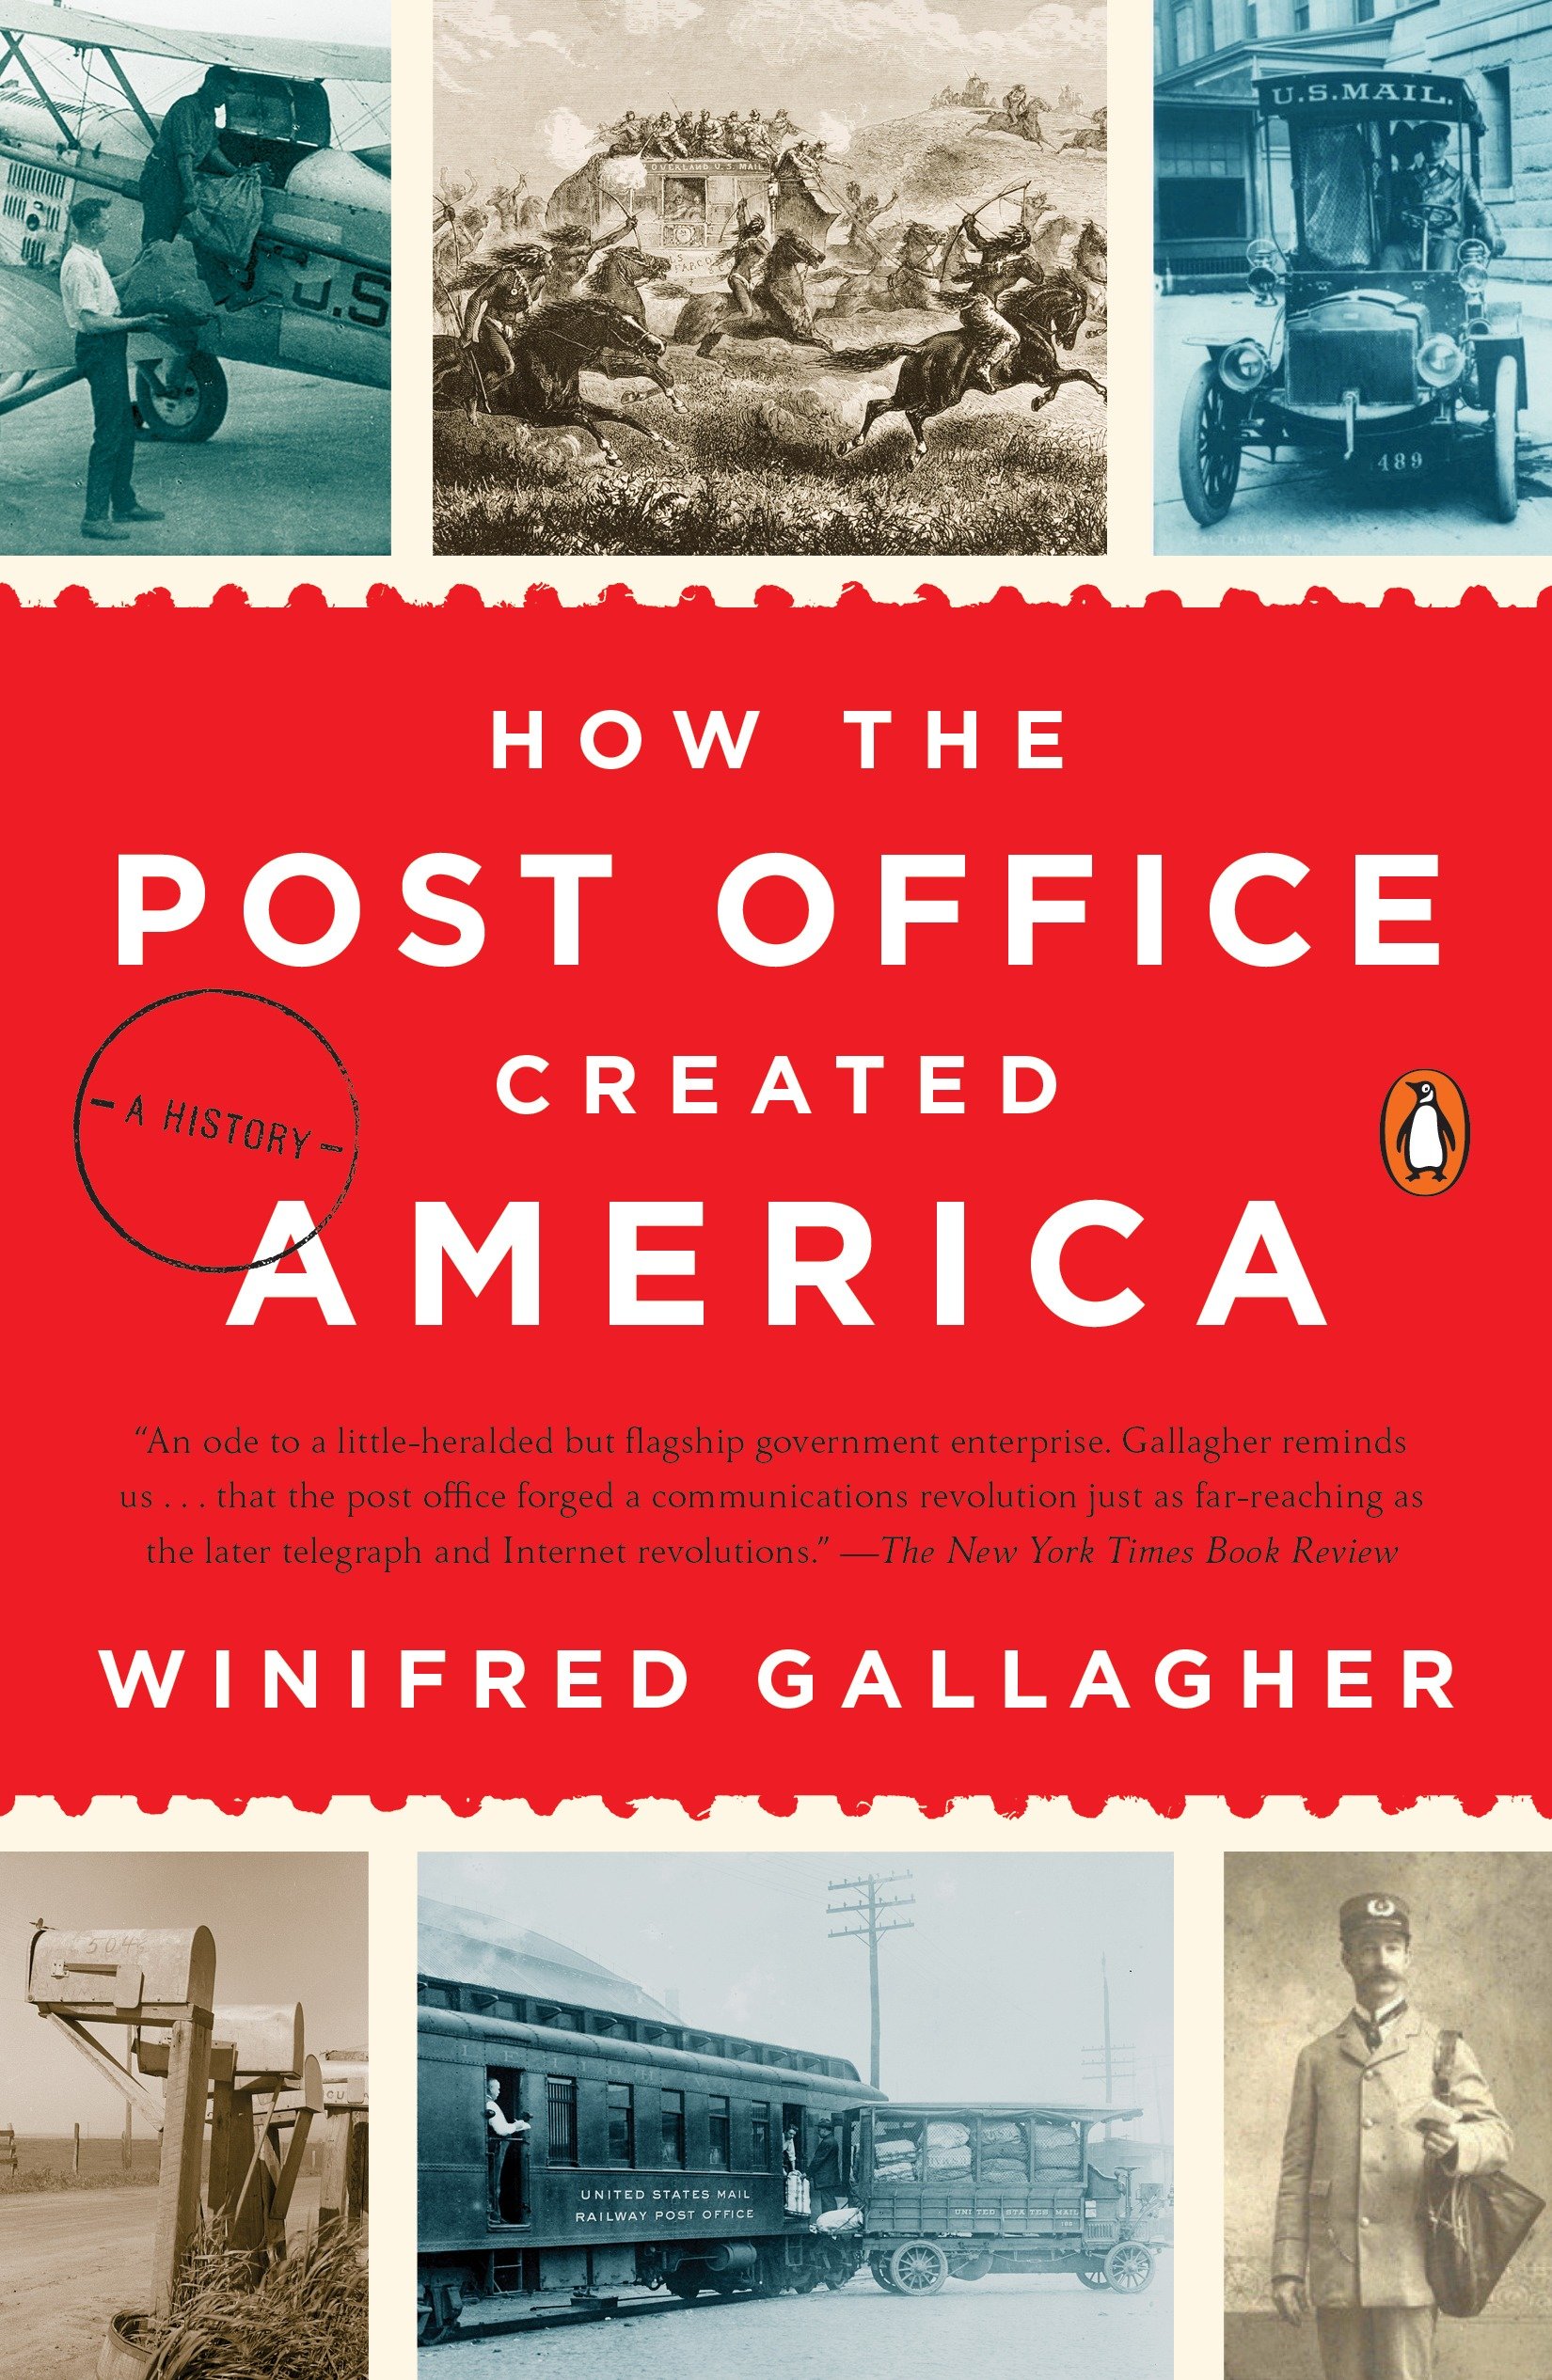 Image de couverture de How the Post Office Created America [electronic resource] : A History